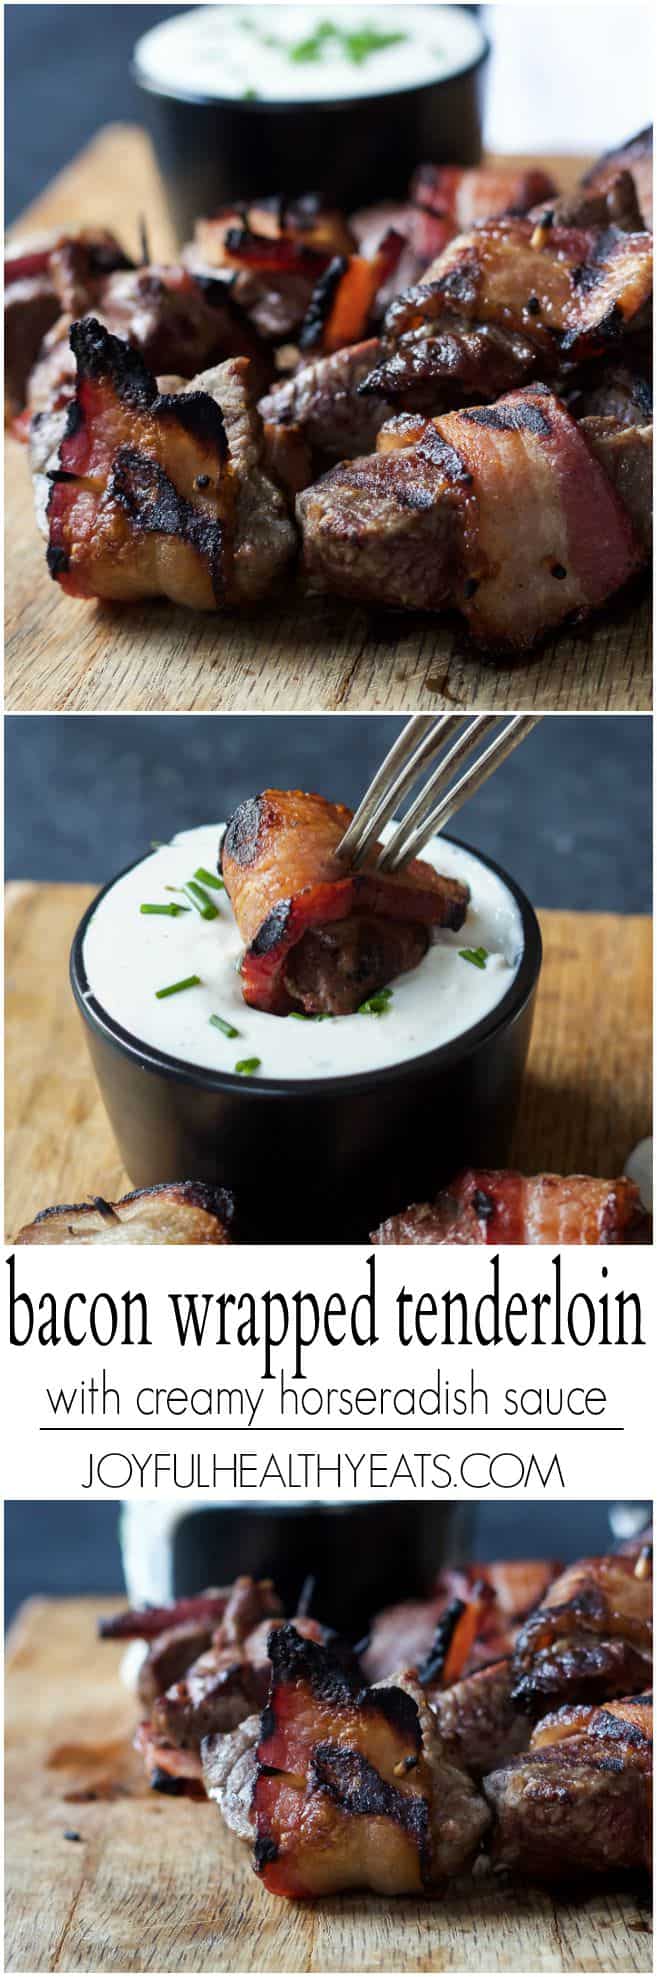 Pinterest image for Bacon Wrapped Tenderloin with Creamy Horseradish Sauce